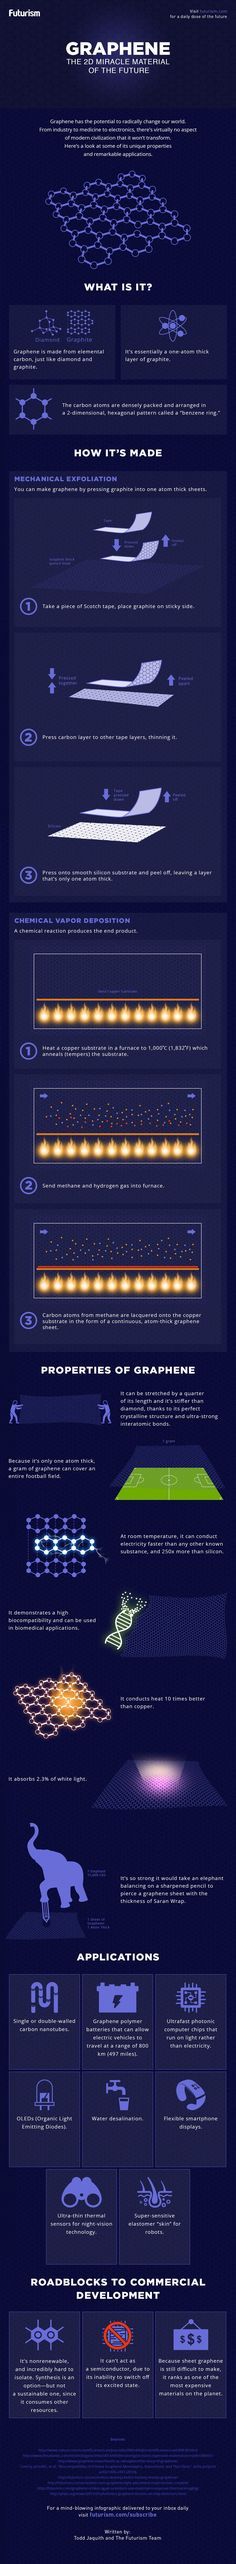 Graphene: The Miracle Material of the Future [INFOGRAPHIC]